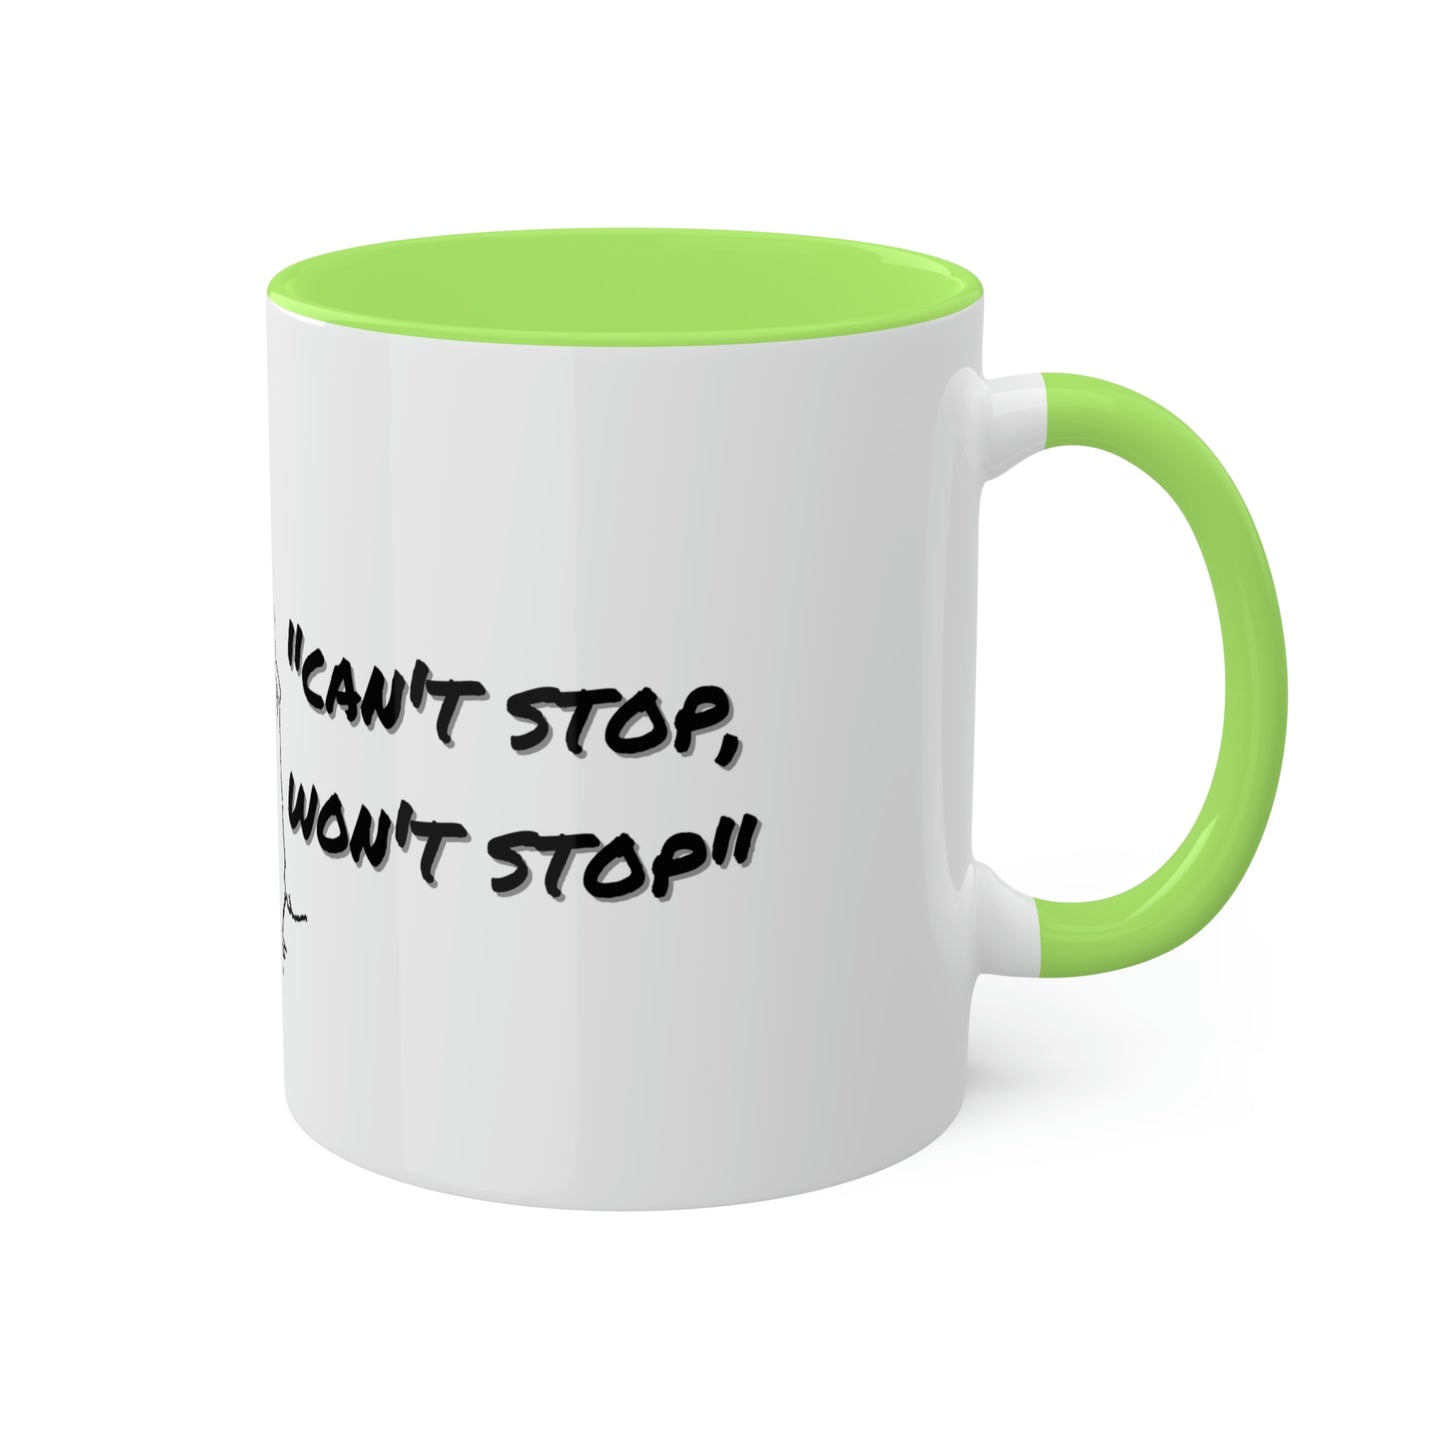 P Diddy #Love #CantStopWontStop - Colorful Mugs, 11oz